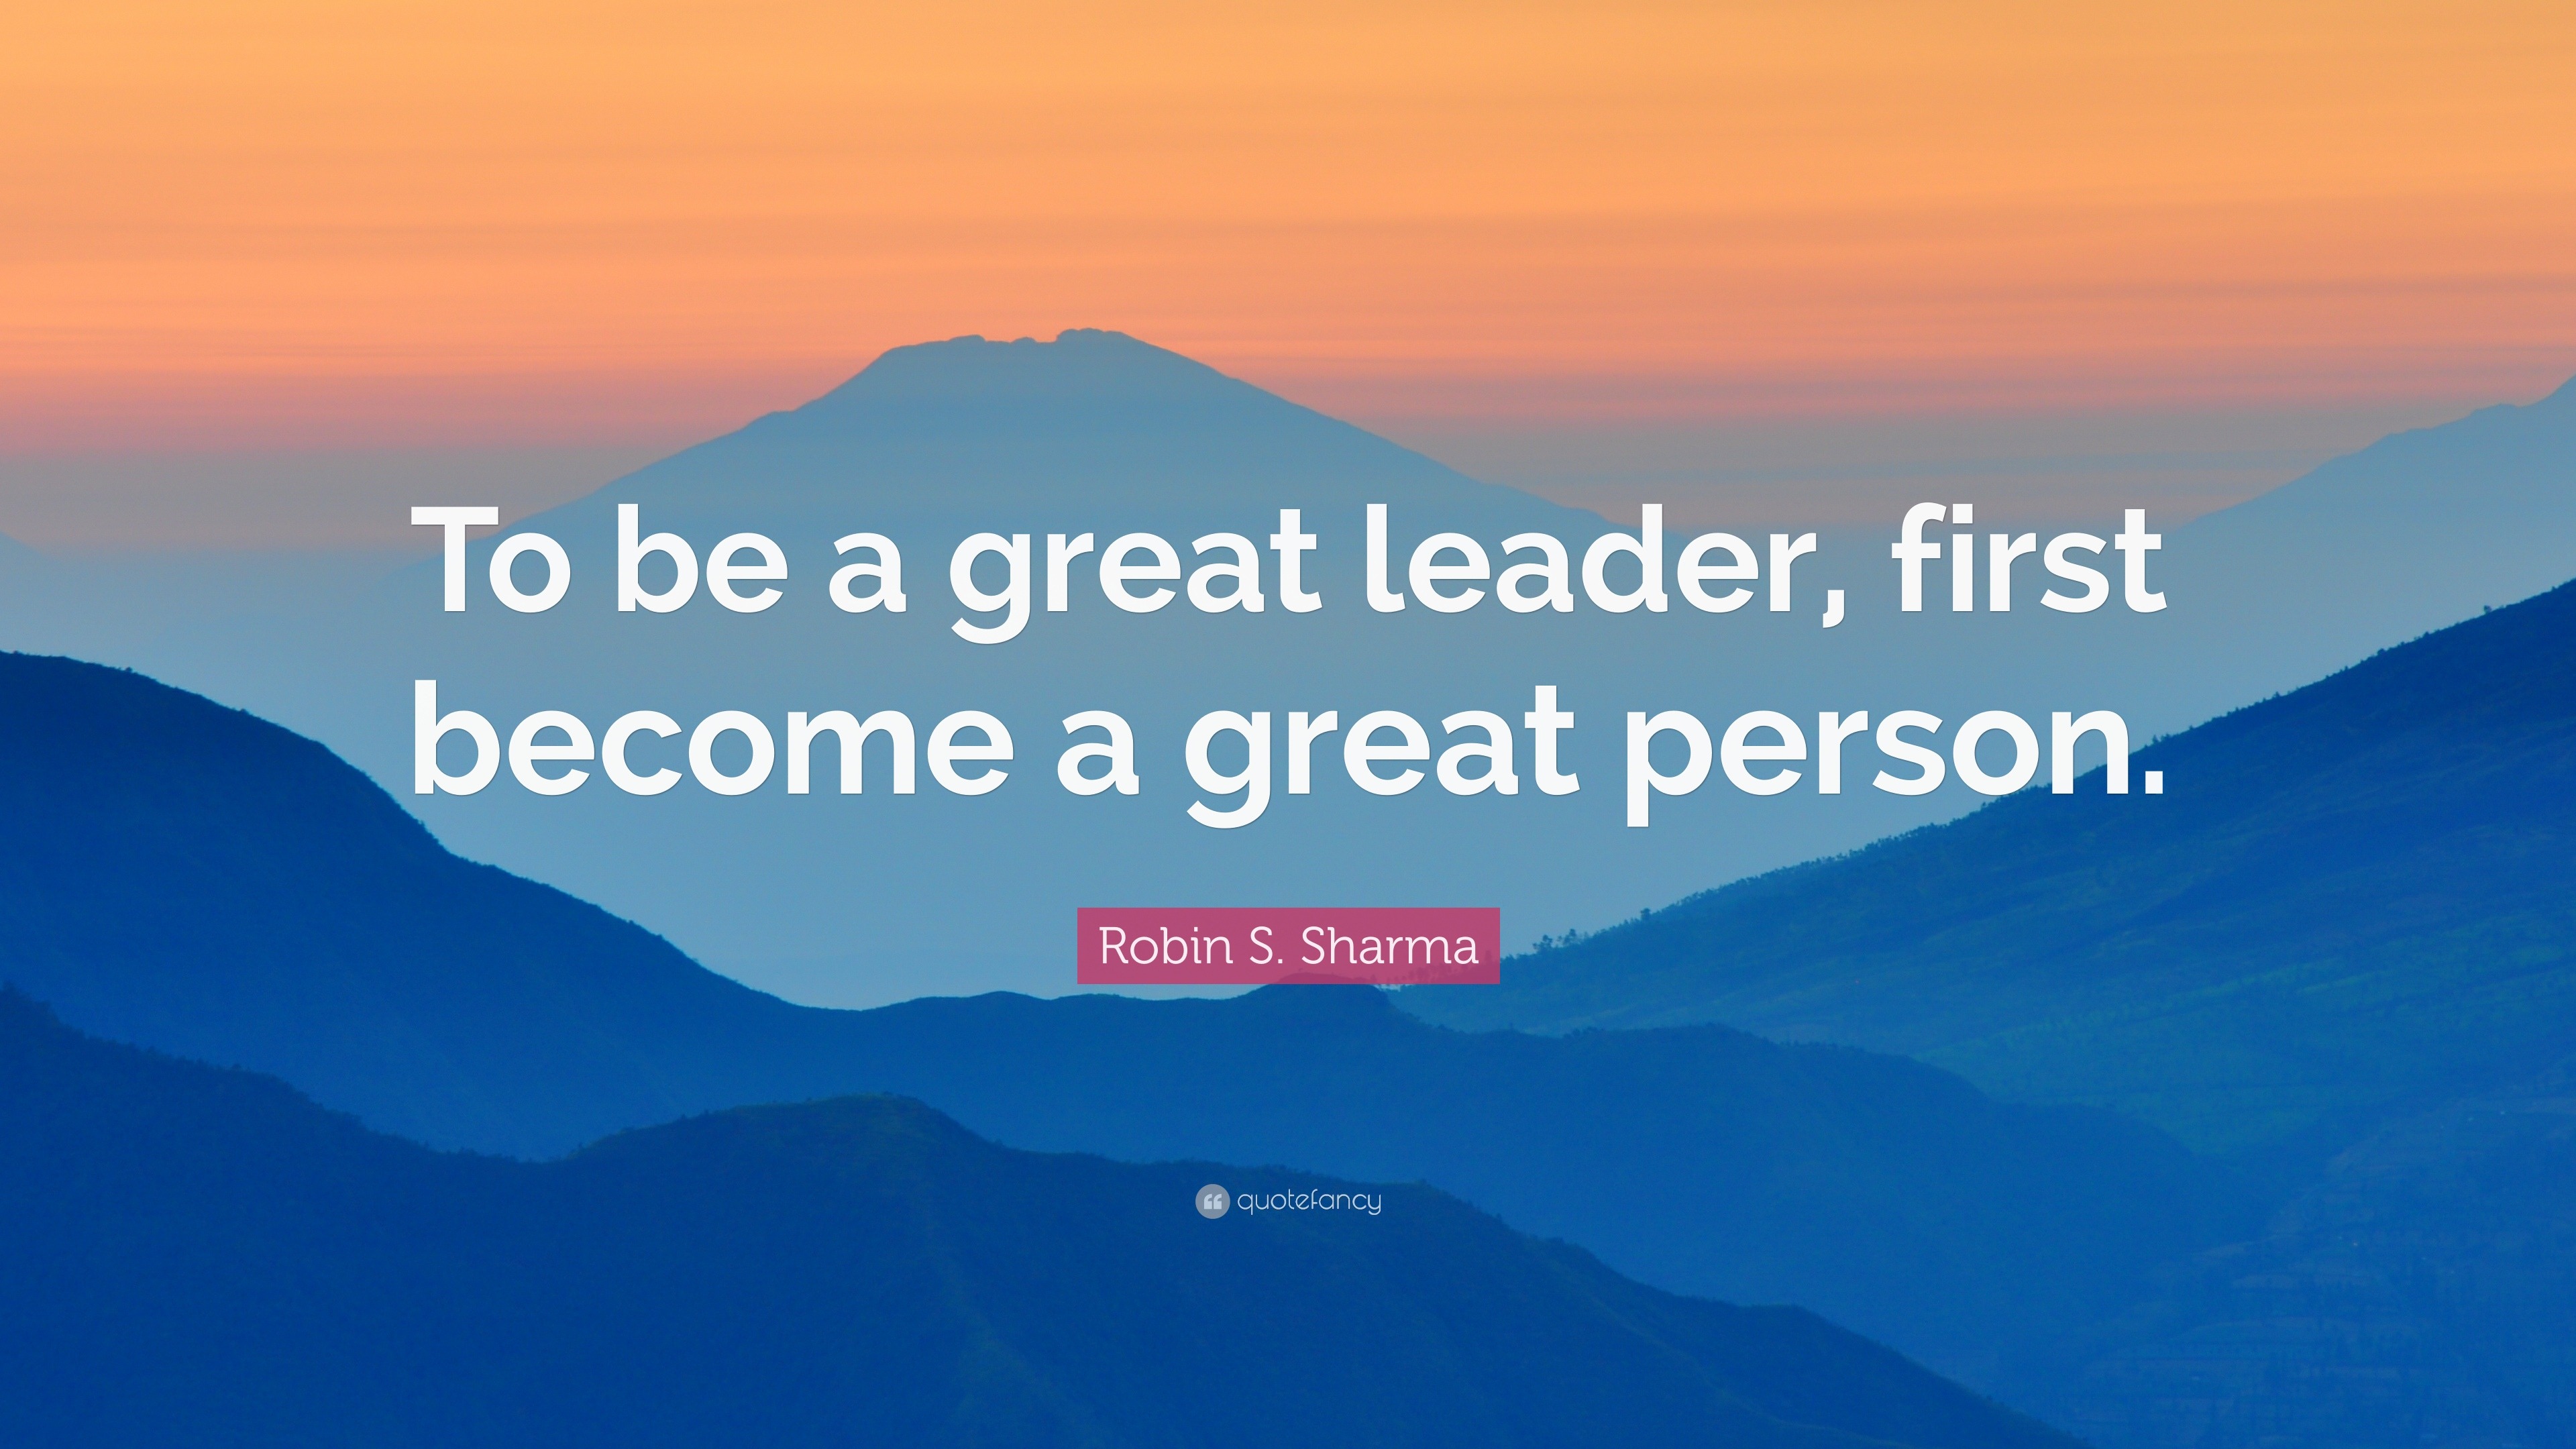 To Be A Great Leader Quotes : BEST EVER POSTER QUOTES ON LEADERSHIP